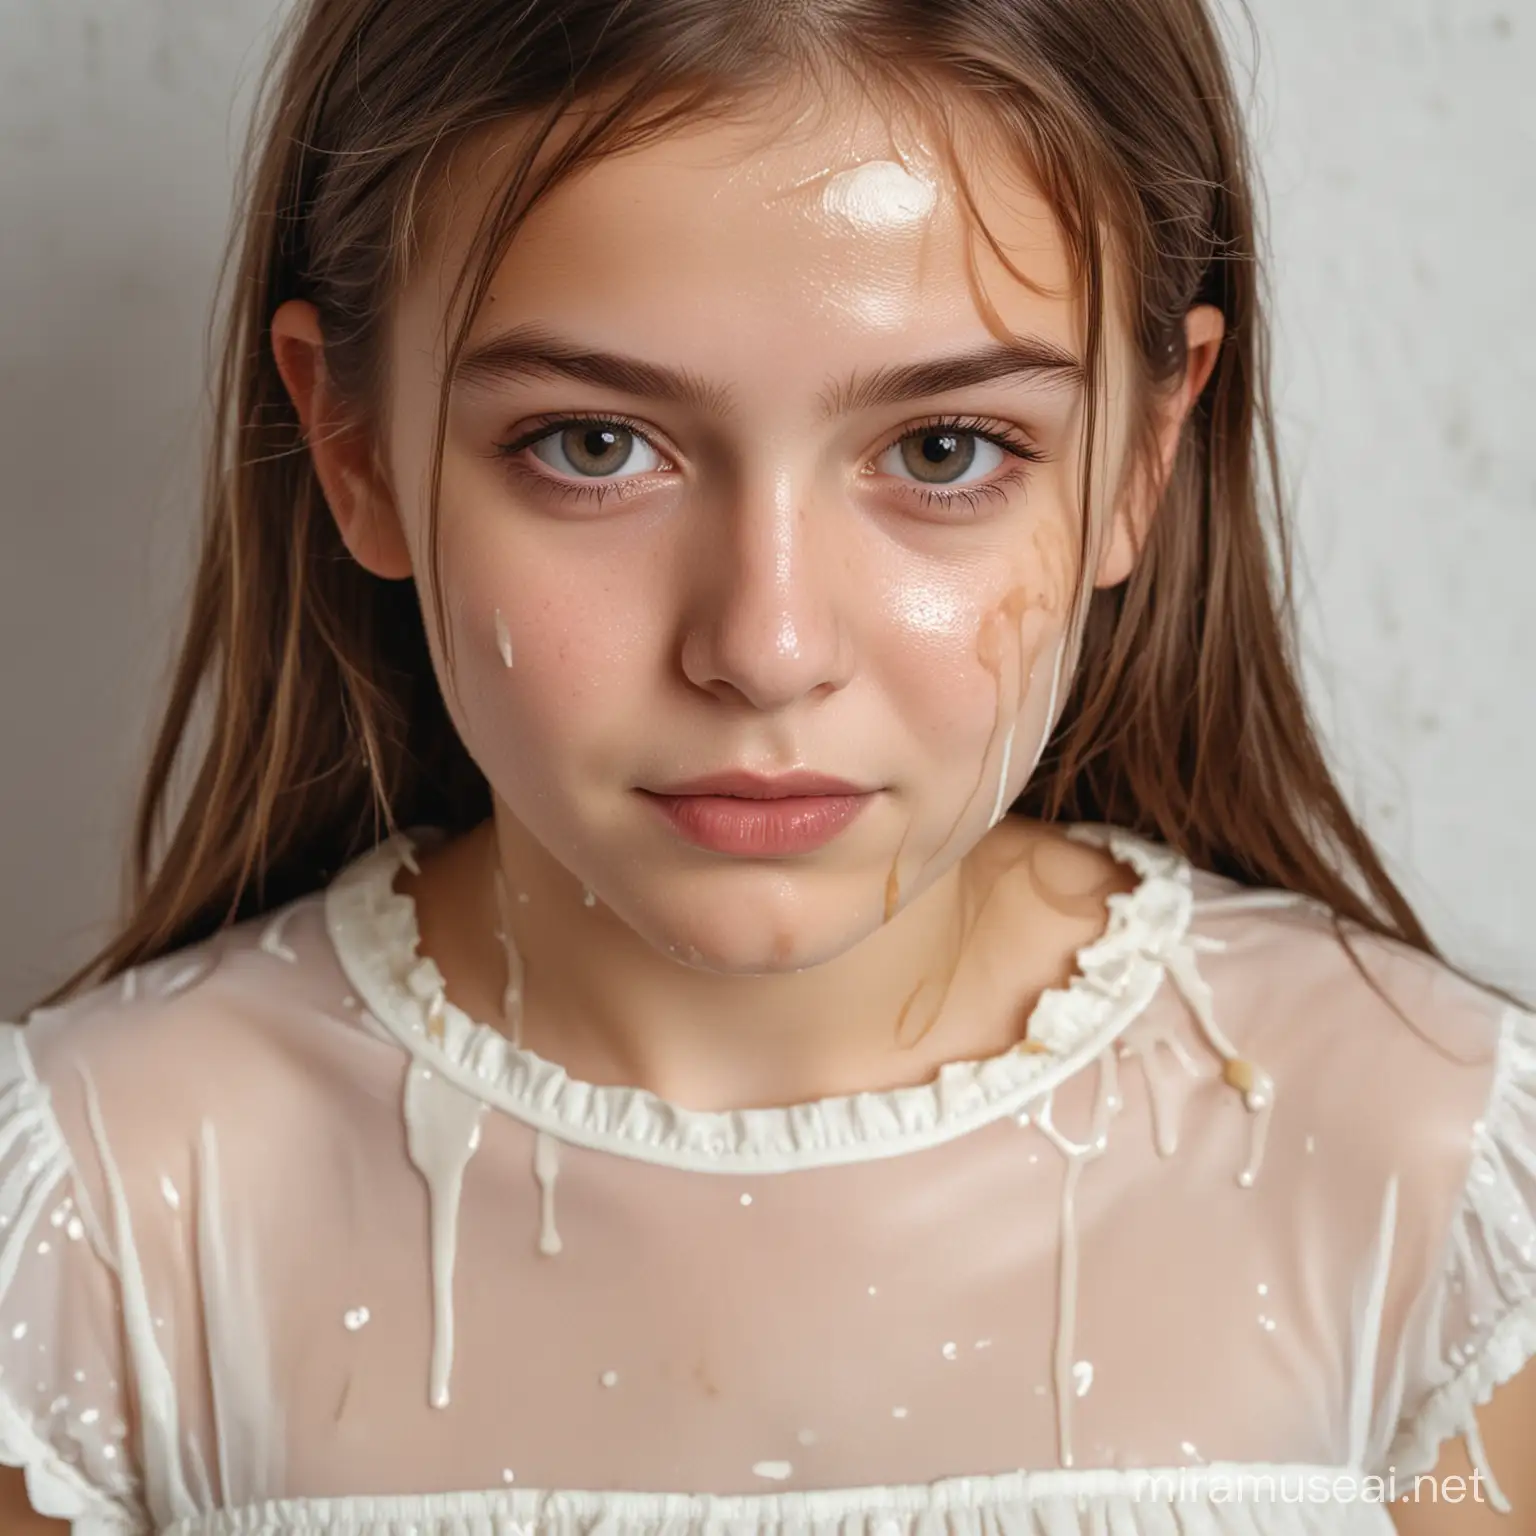 Girl in MilkStained Dress Innocence and Messy Fun